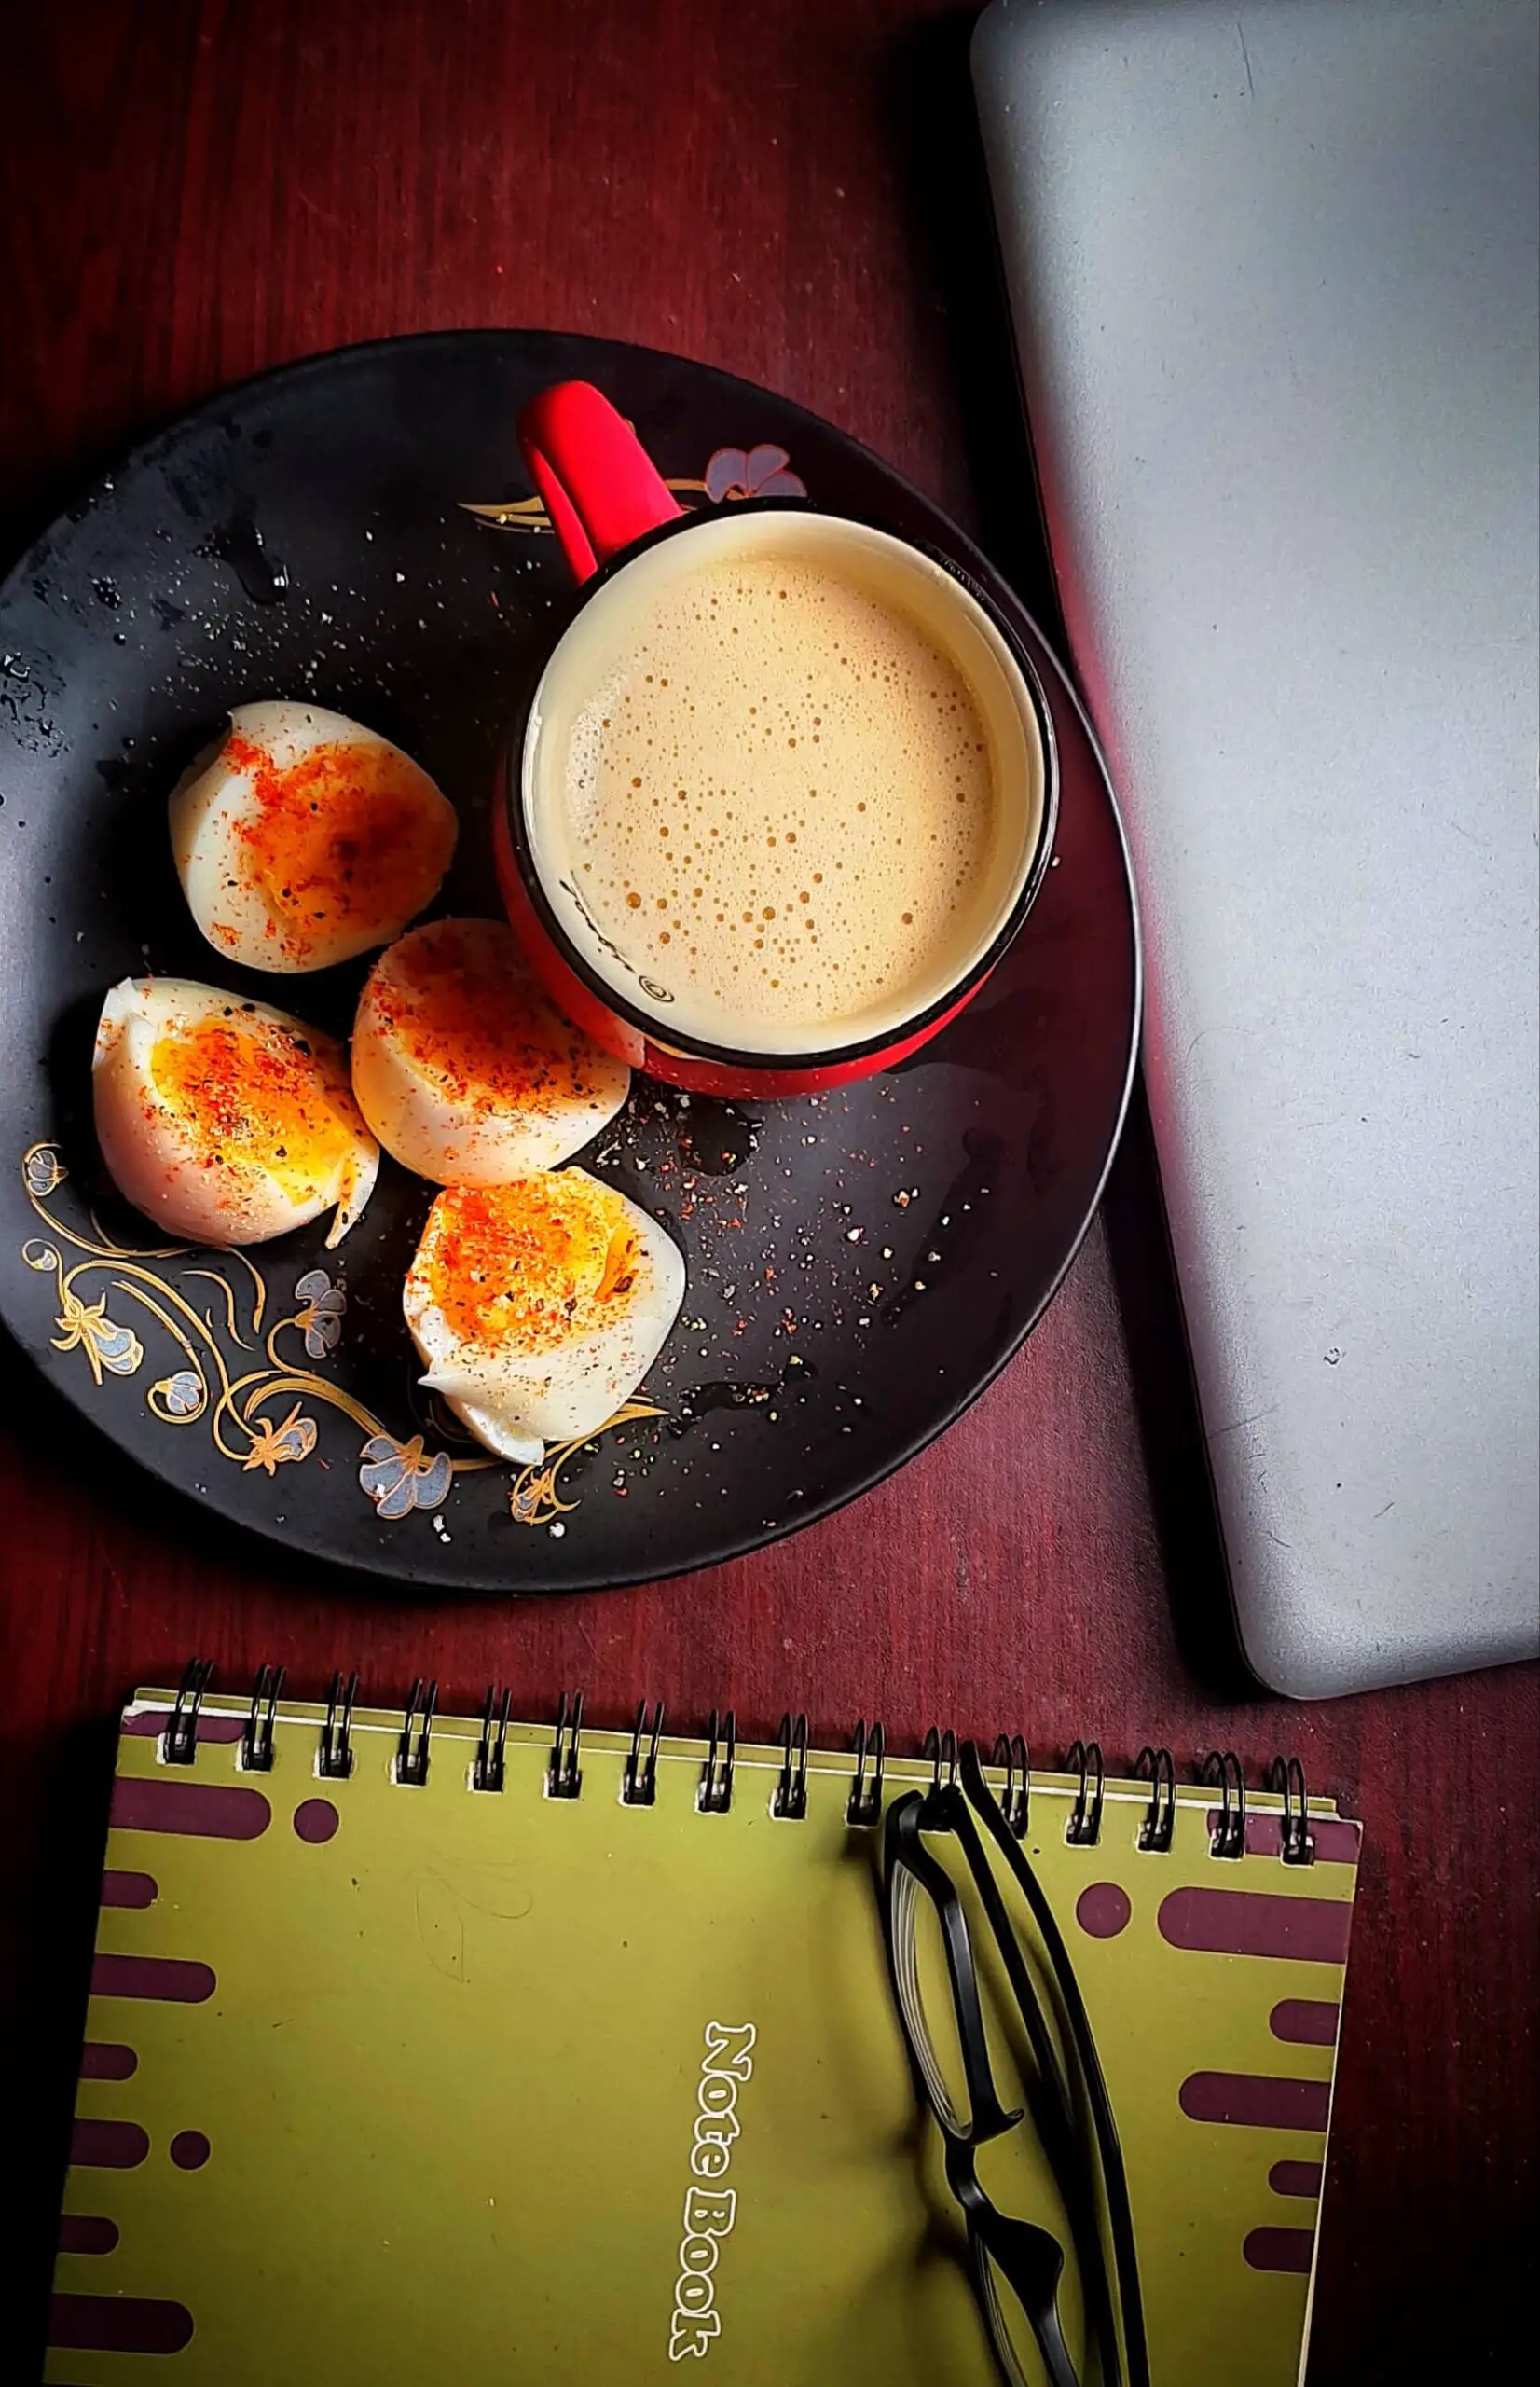 https://gravyflavour.com/wp-content/uploads/2020/04/Bulletproof-Coffee-Recipe-keto-3-scaled.jpg